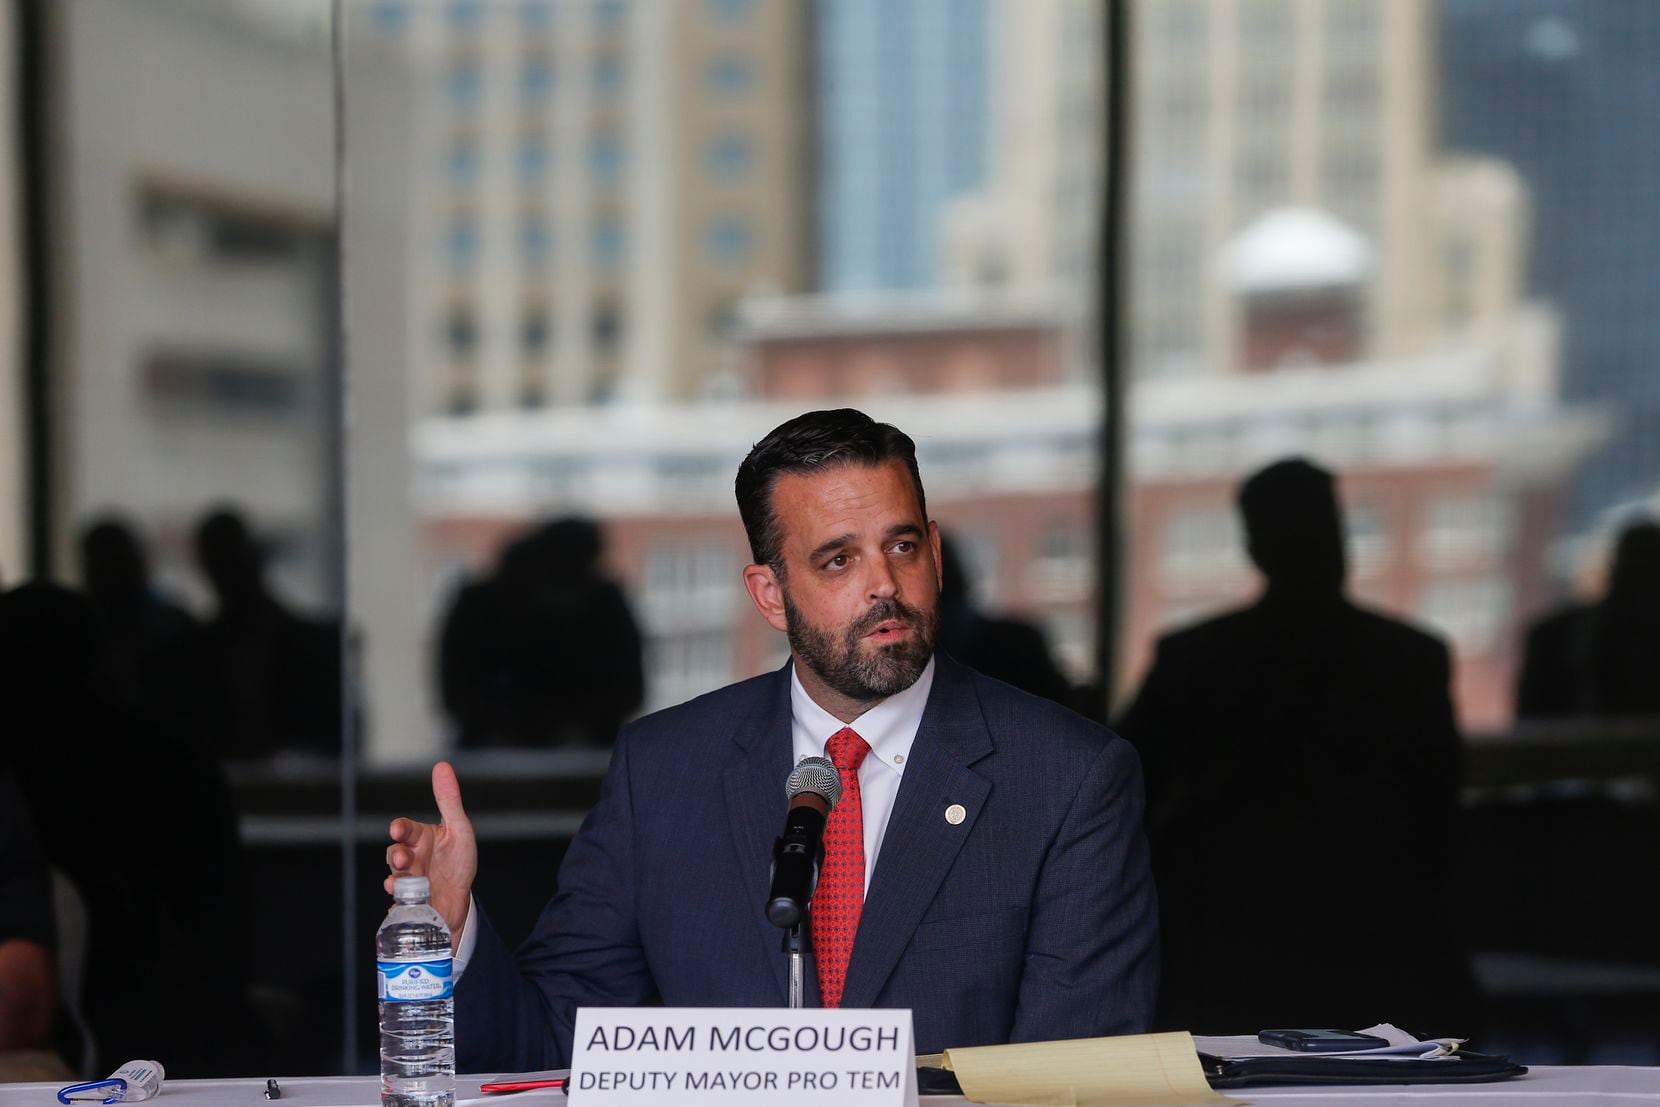 Among Adam McGough's leadership assignments since his election to the Lake Highlands-based...